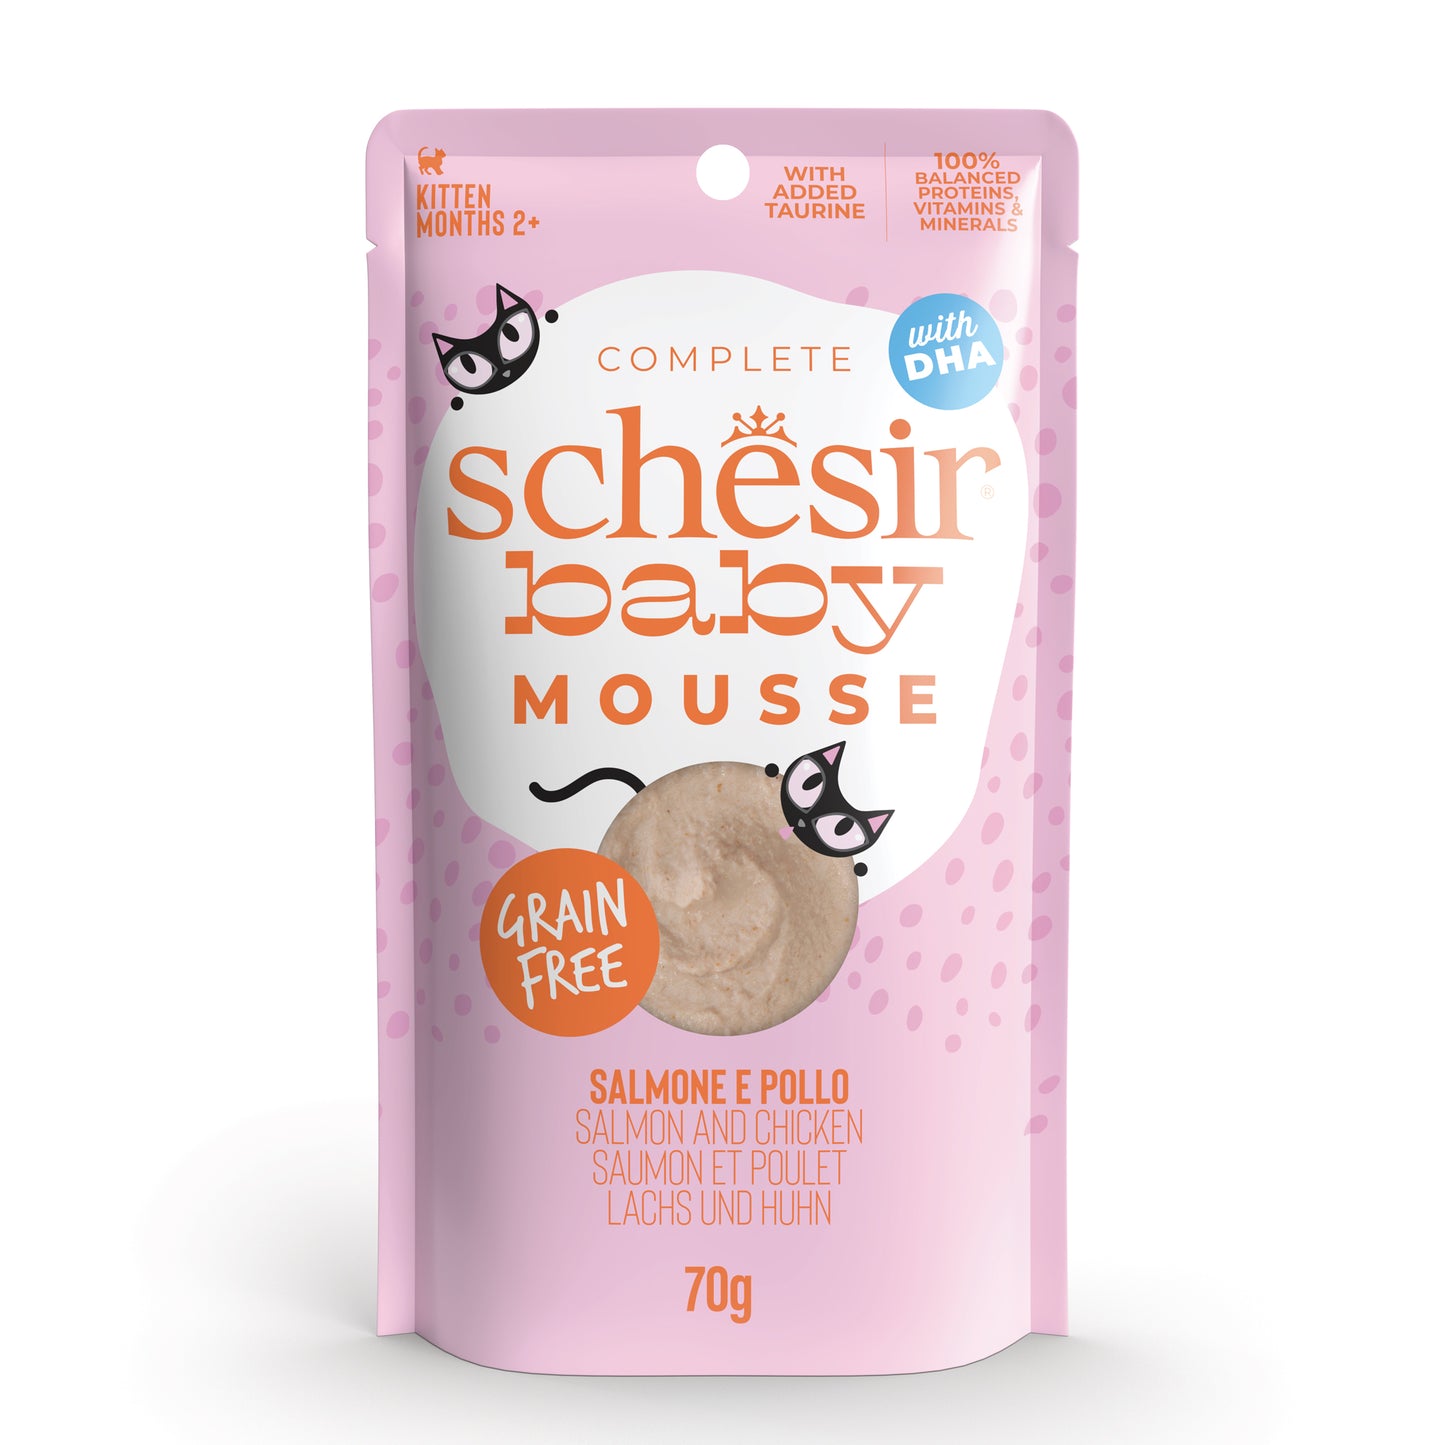 [5% OFF NNC Members] Schesir Baby Velvet Mousse - Salmon and Chicken, 70g